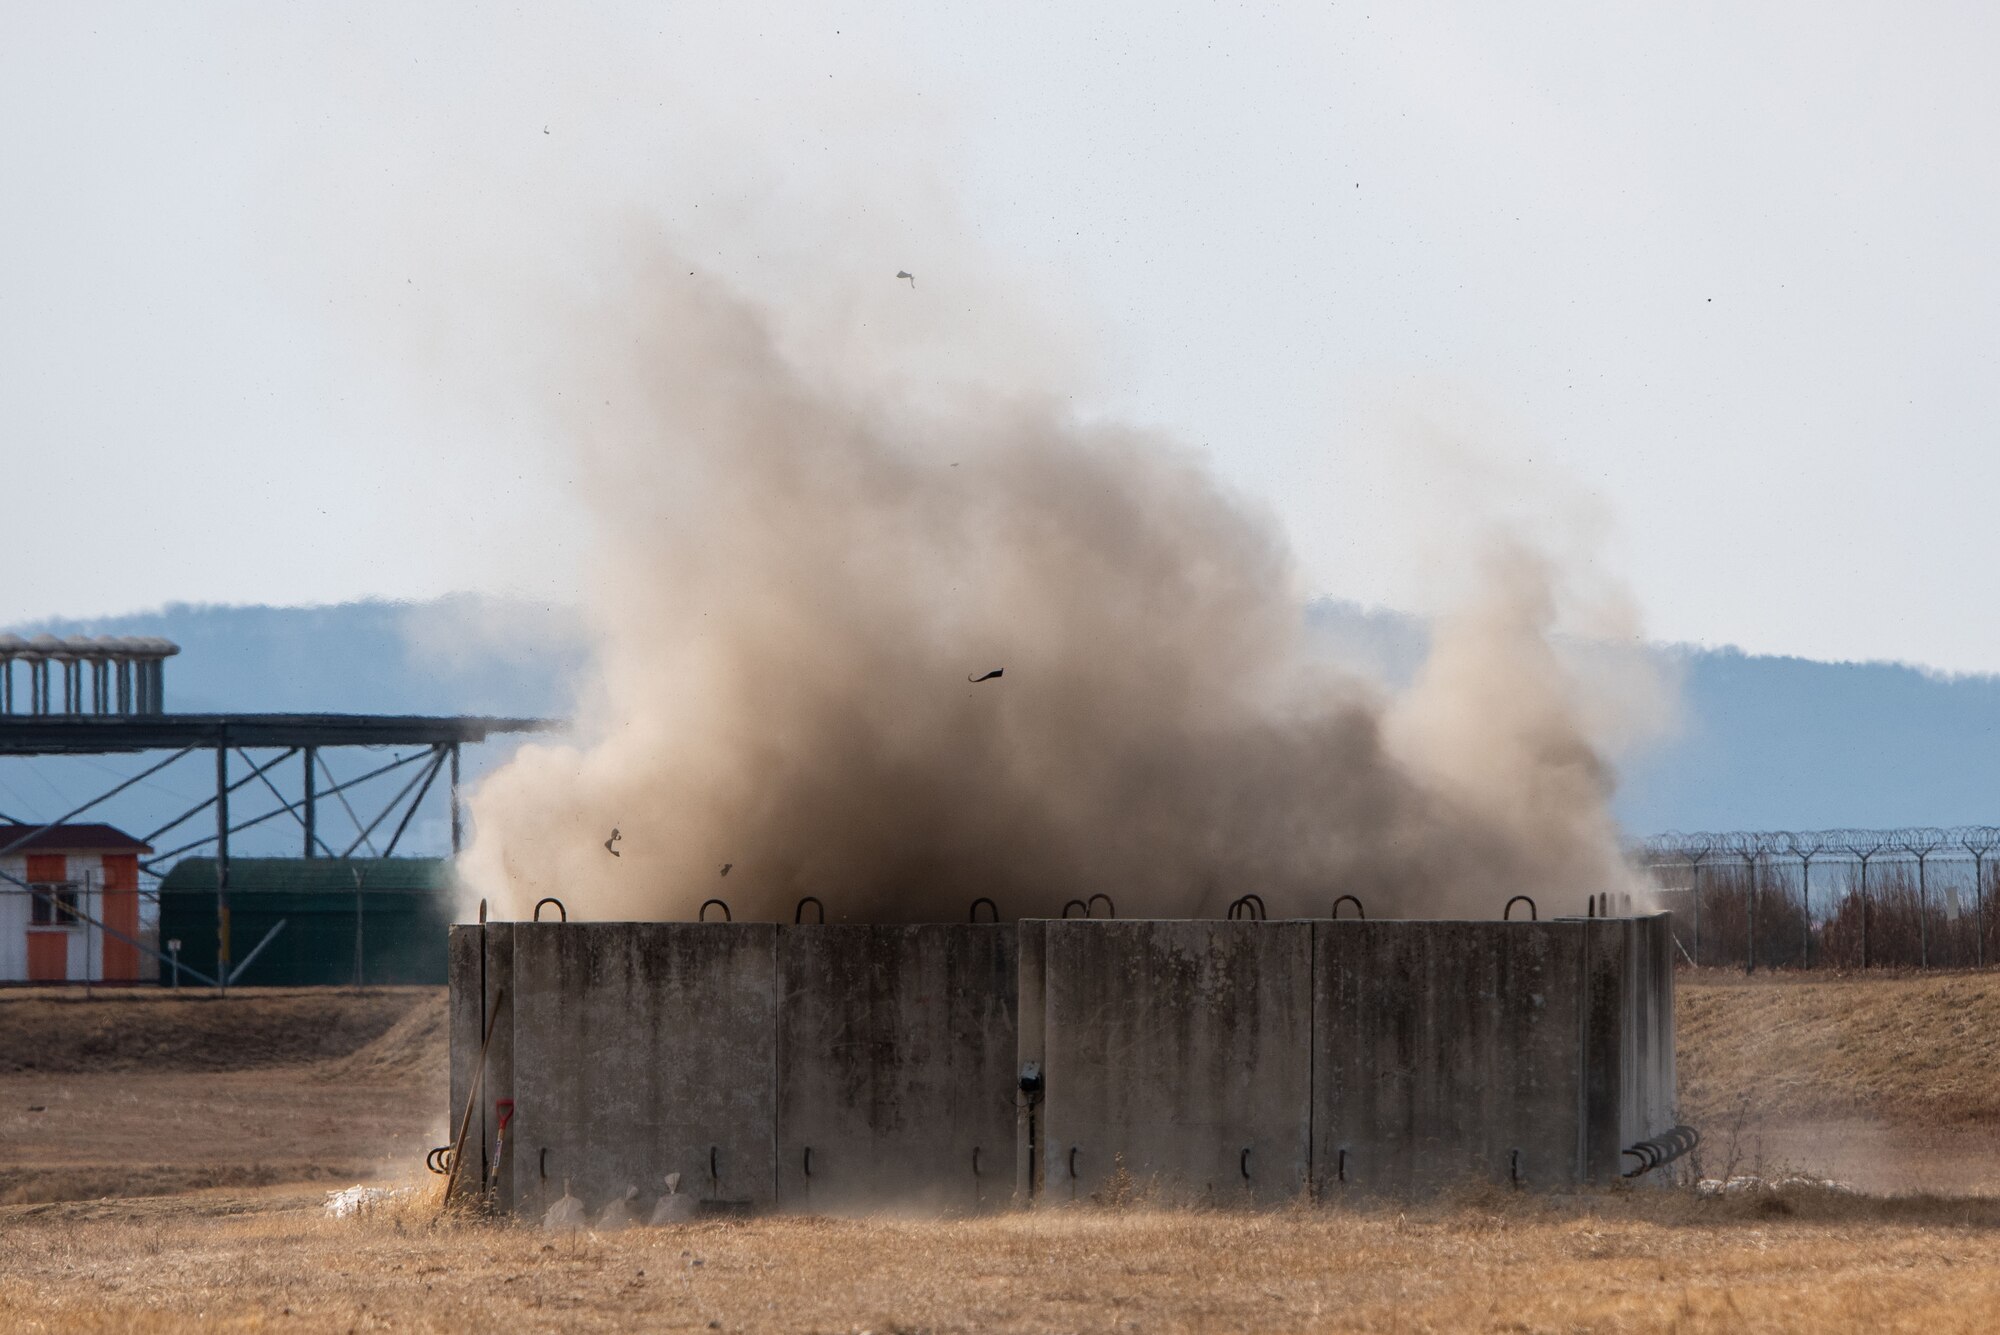 An explosive charge is detonated at a 51st Civil Engineer Squadron Explosive Ordnance Disposal (EOD) flight test site